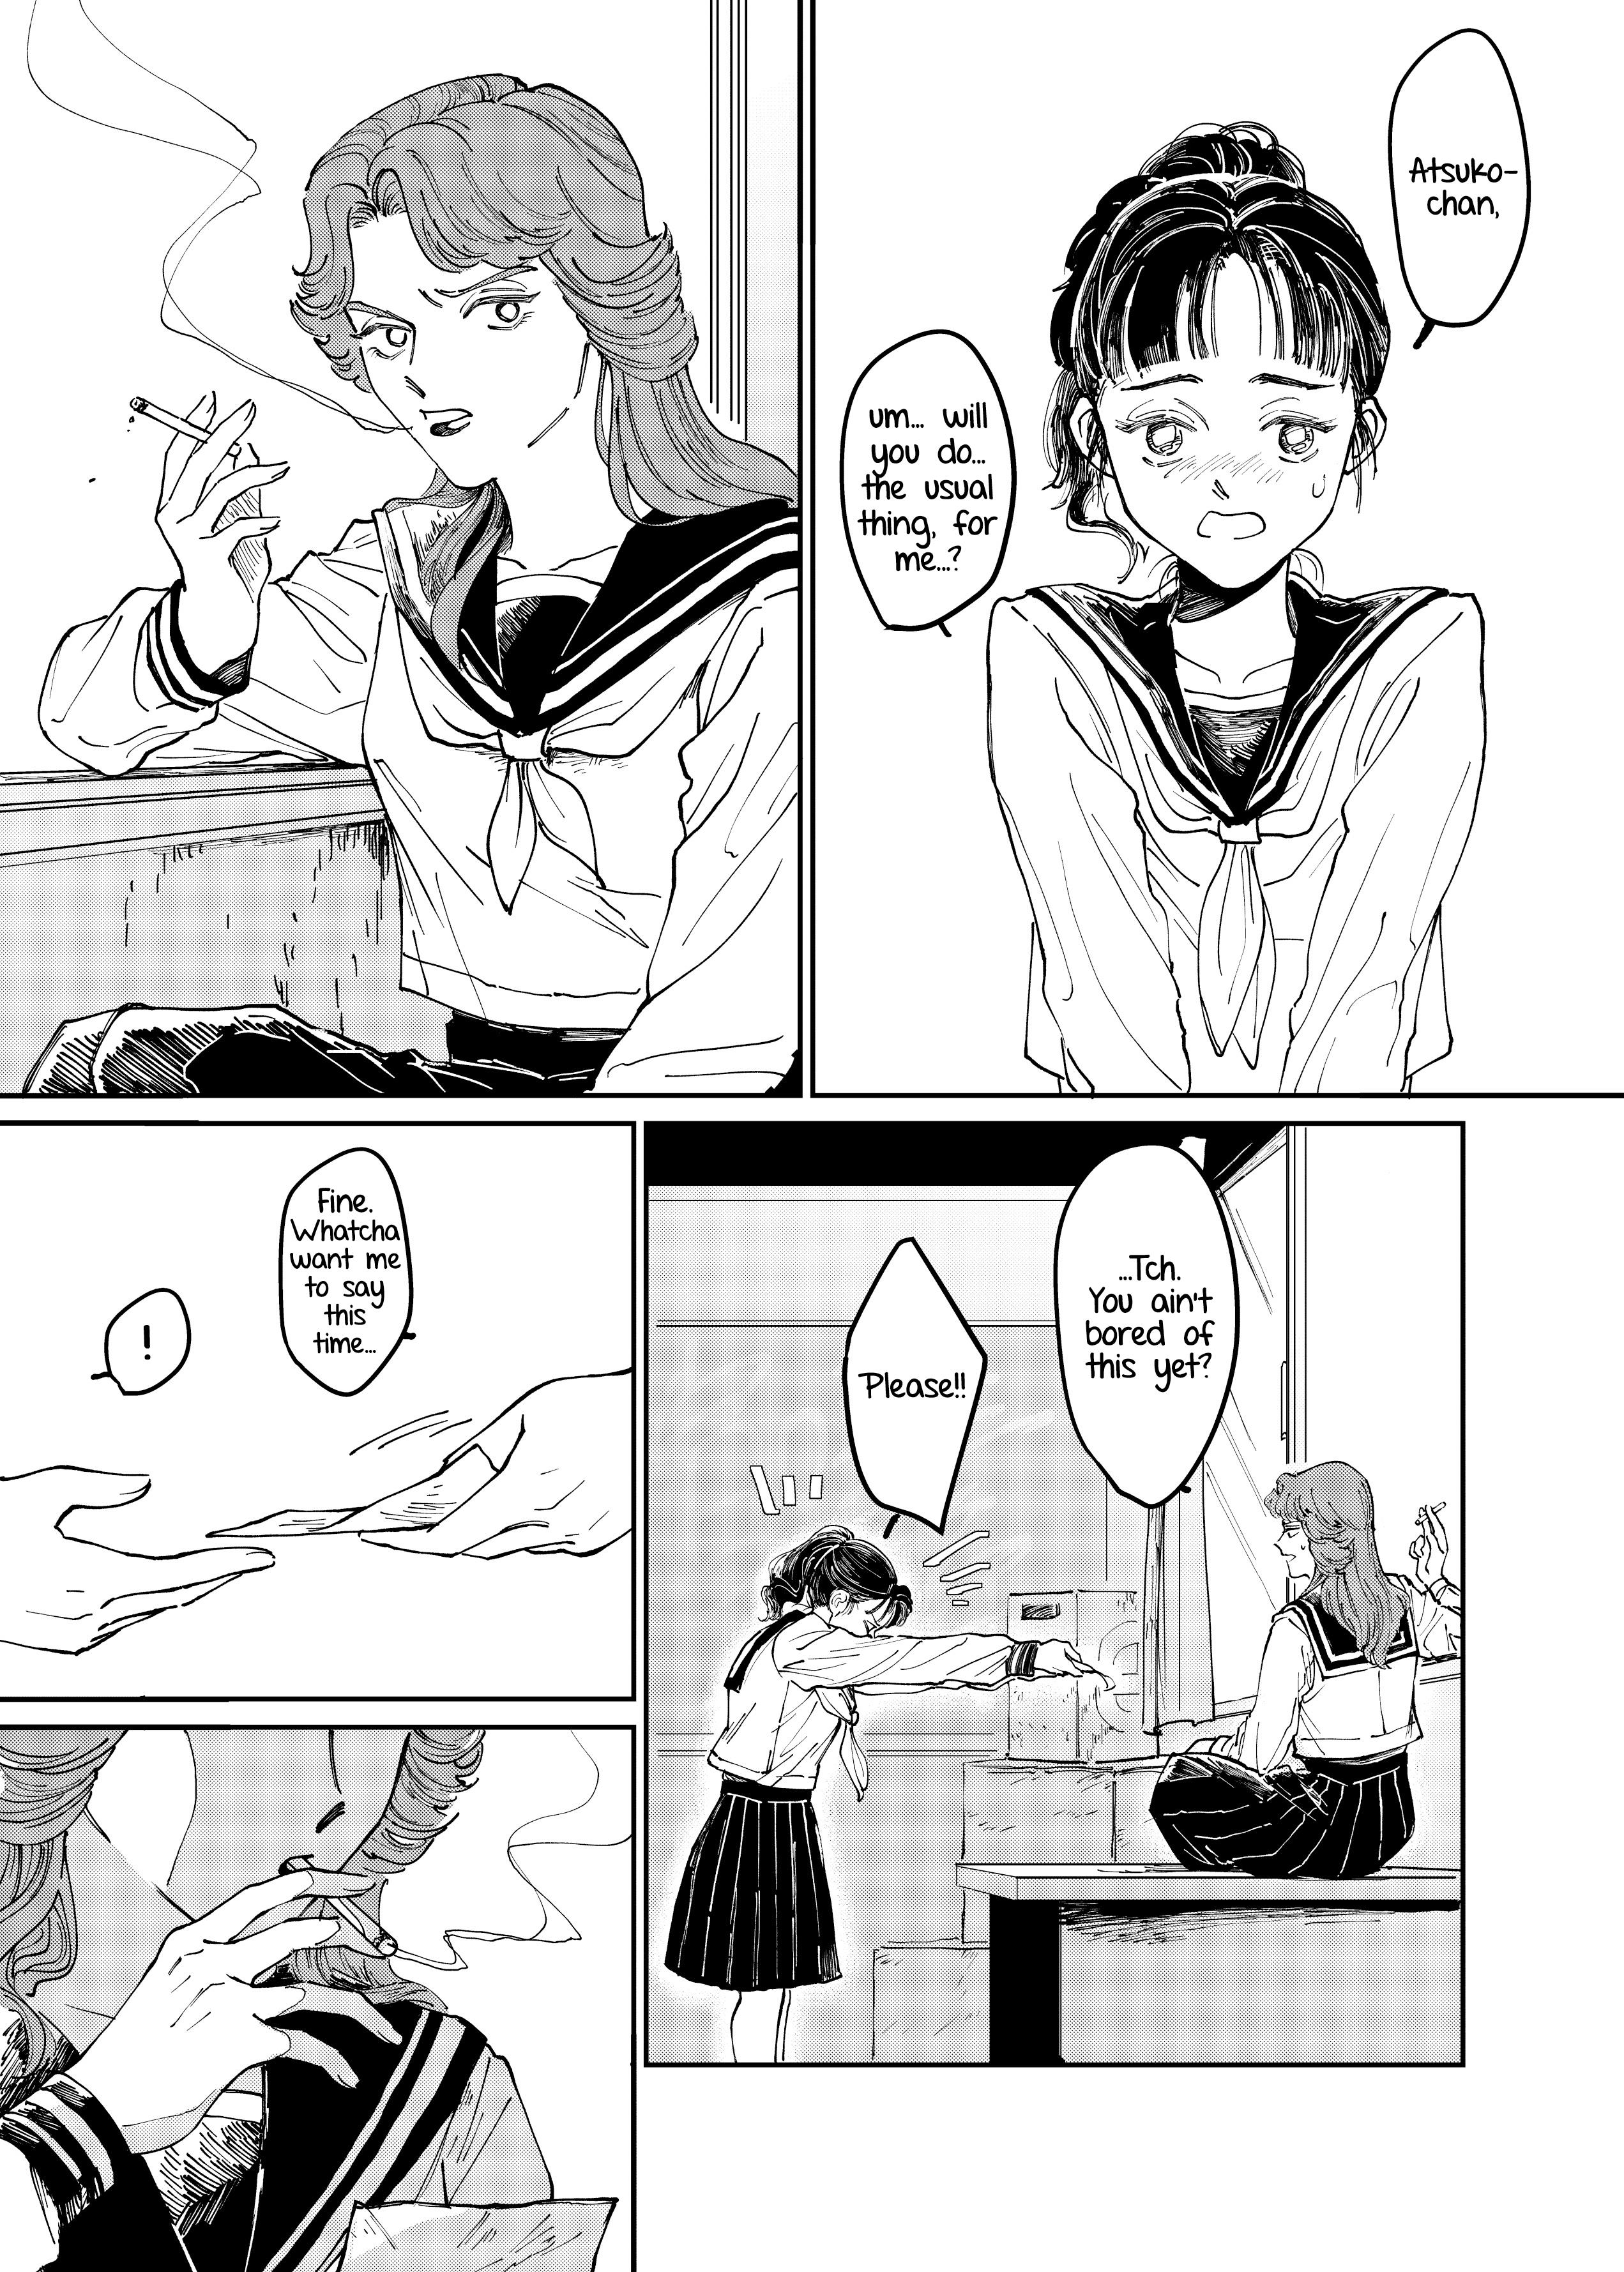 A Sukeban, A Transfer Student, And Their Silly Little Game - Page 1